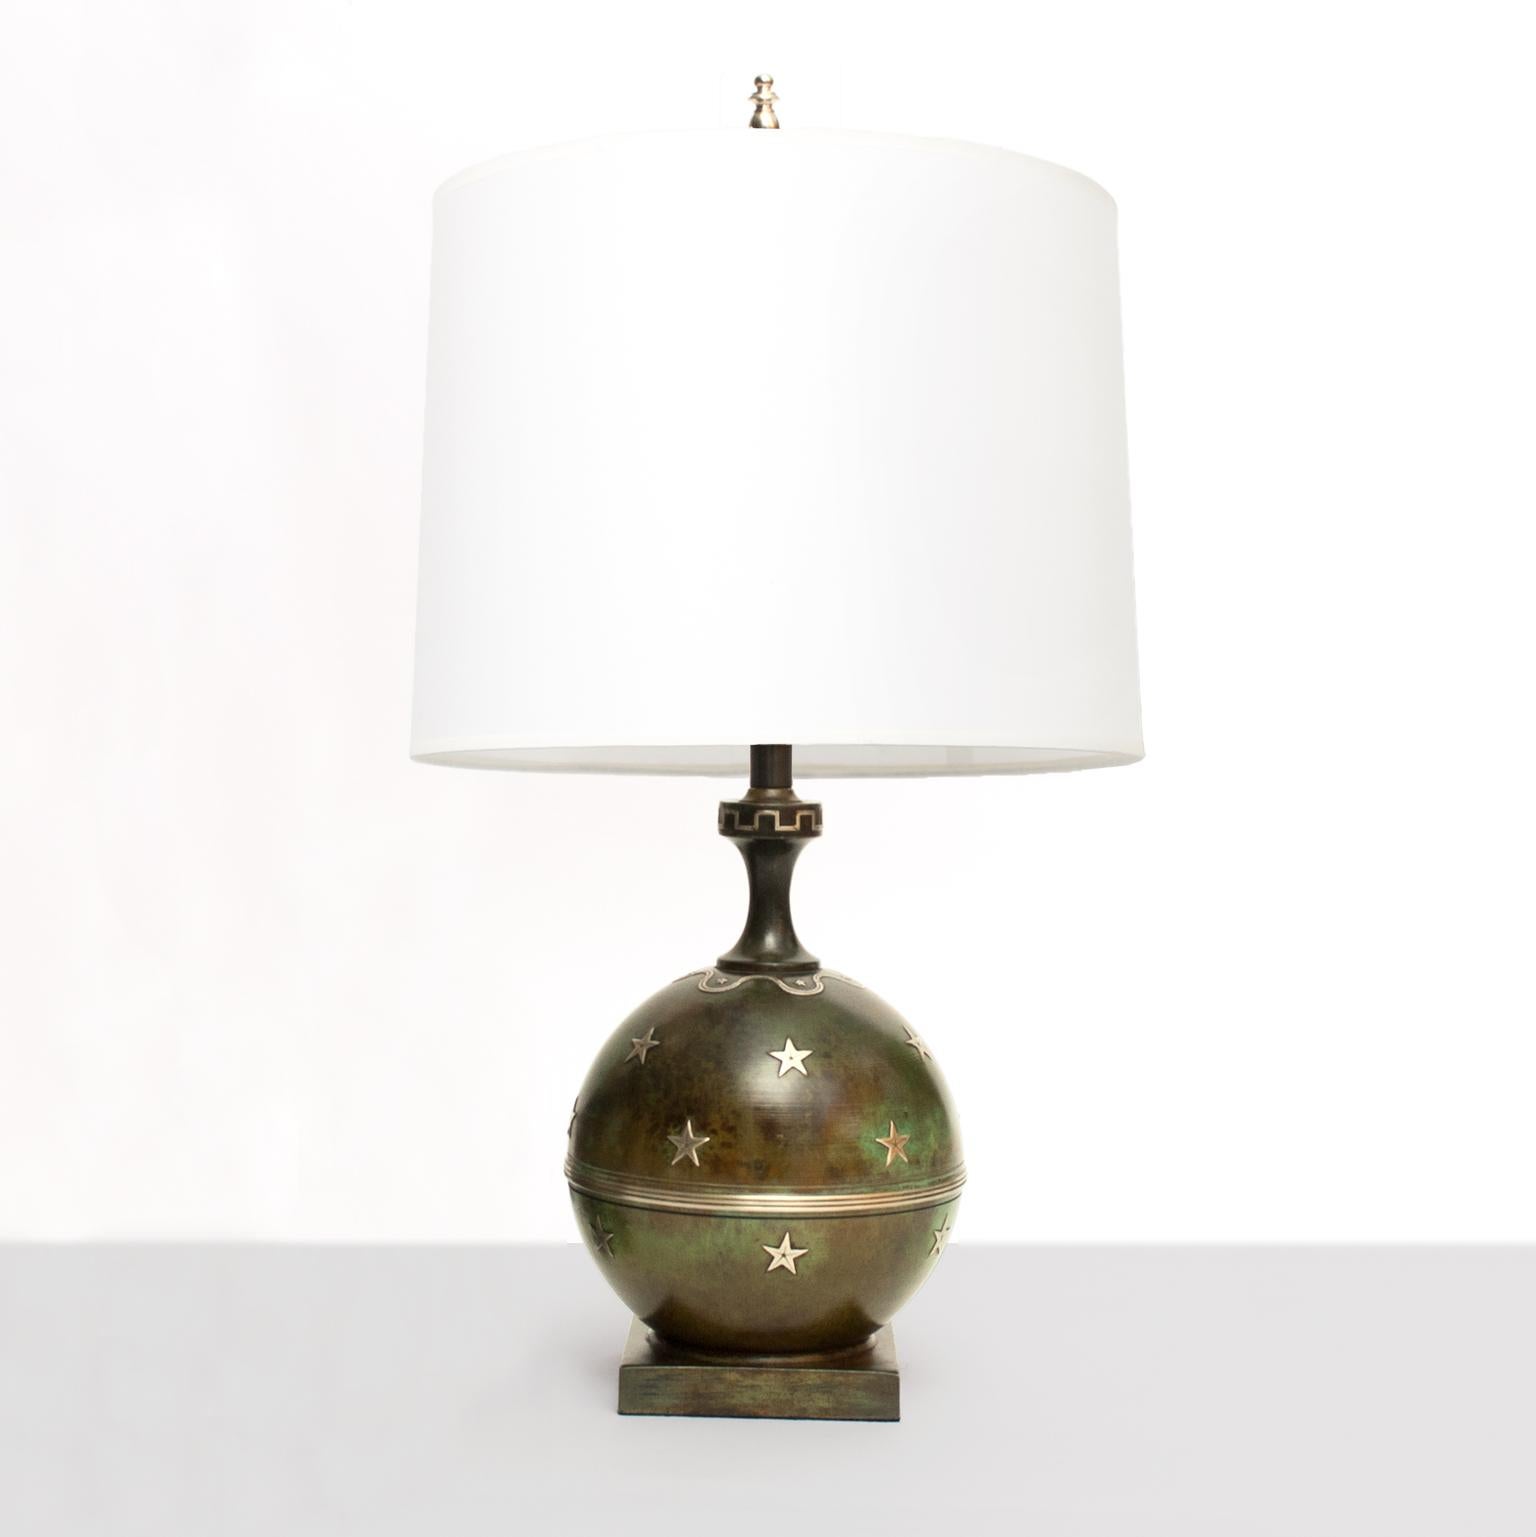 A Scandinavian modern spherical patinated bronze lamp on a rectangular plinth decorated with small stars in silver. Model is 